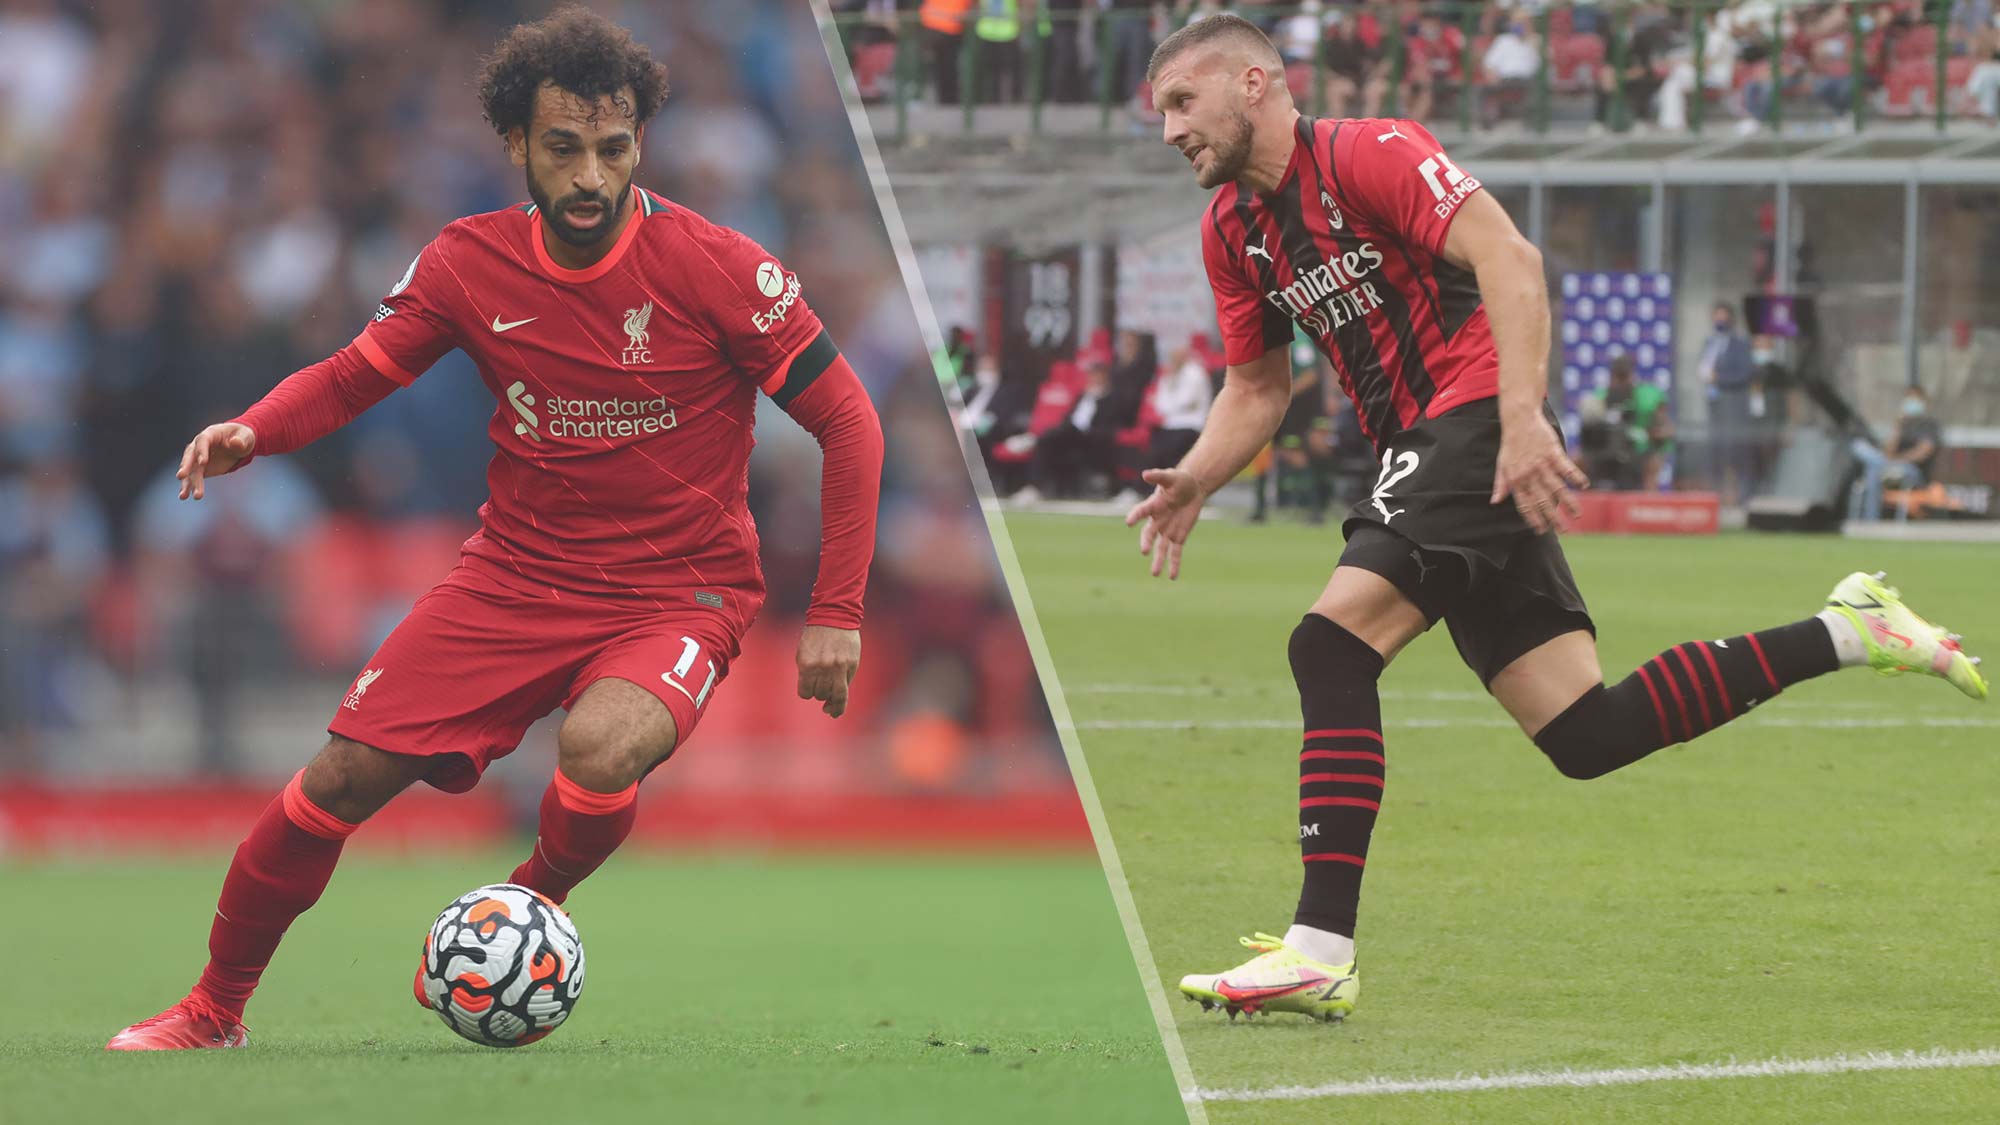 Liverpool vs AC Milan live stream: to watch Champions League match online | Tom's Guide